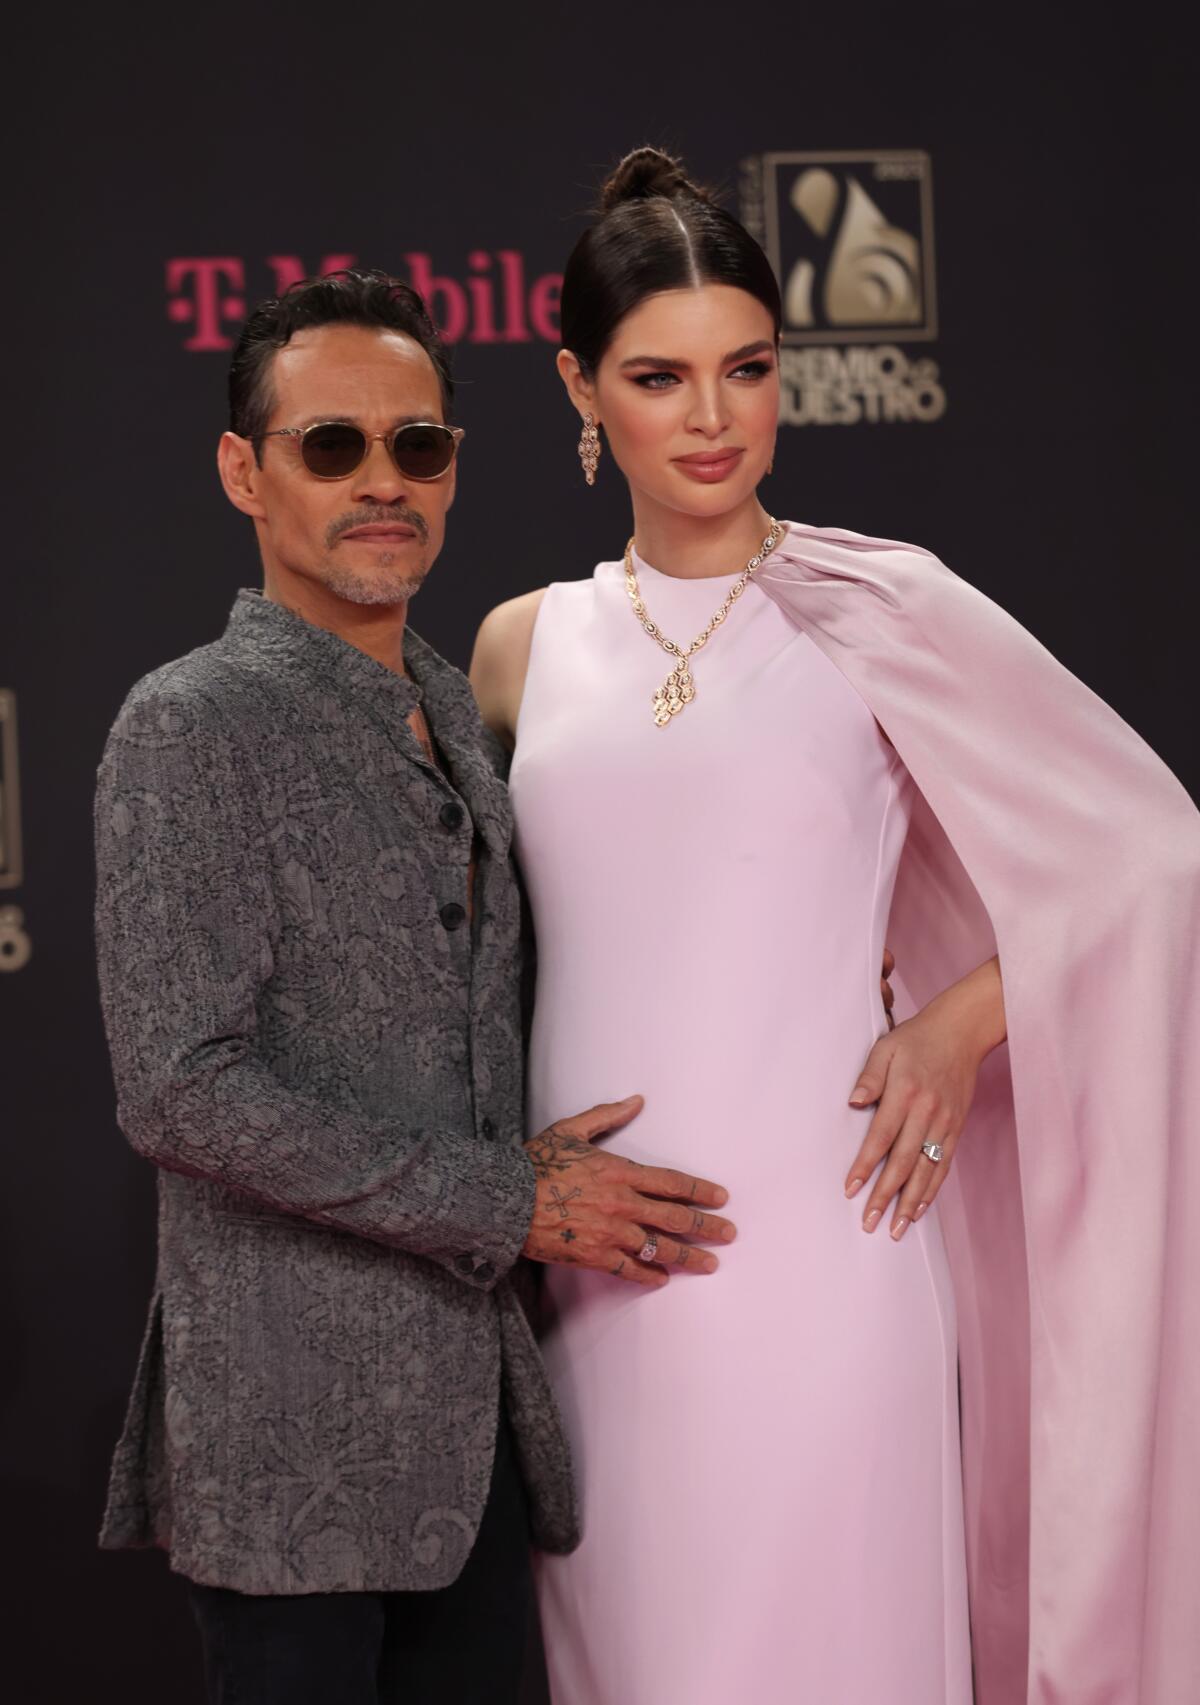 Marc Anthony in a gray suit posing with his hand on wife Nadia Ferreira's belly. She's wearing a light pink dress.